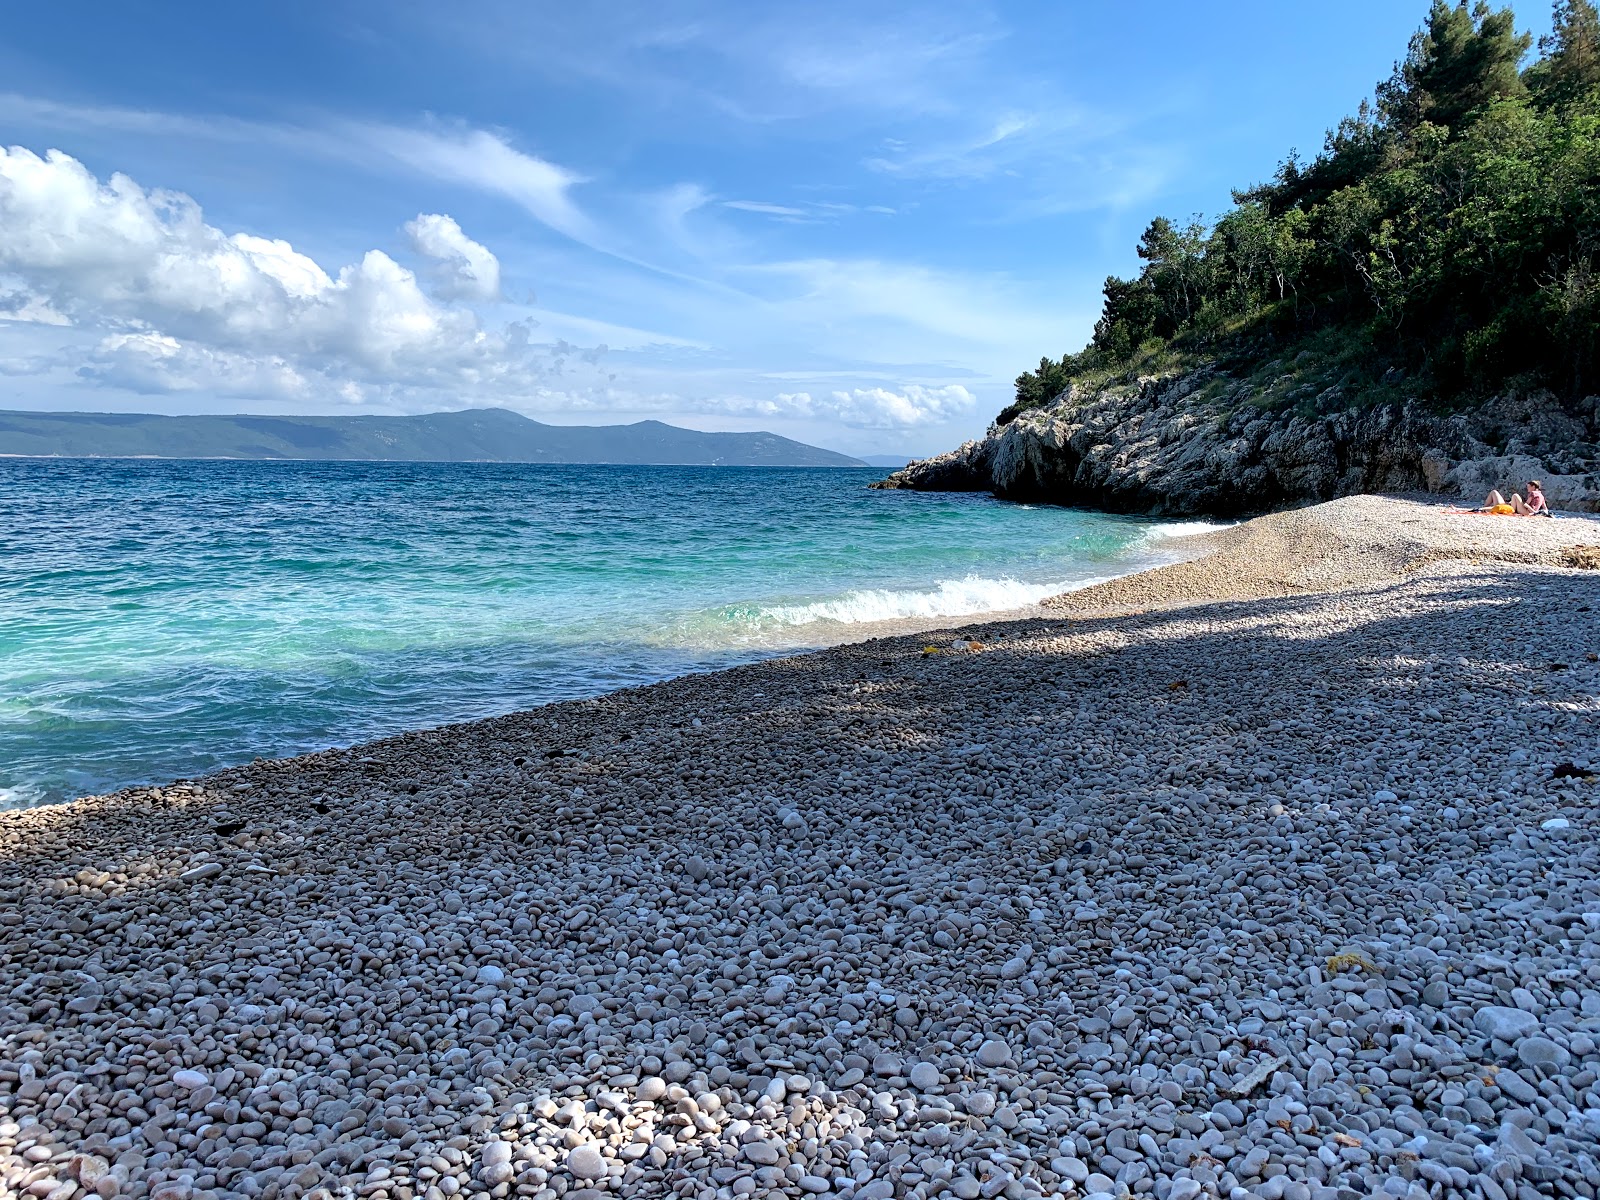 Photo of Jelenscica beach with small bay